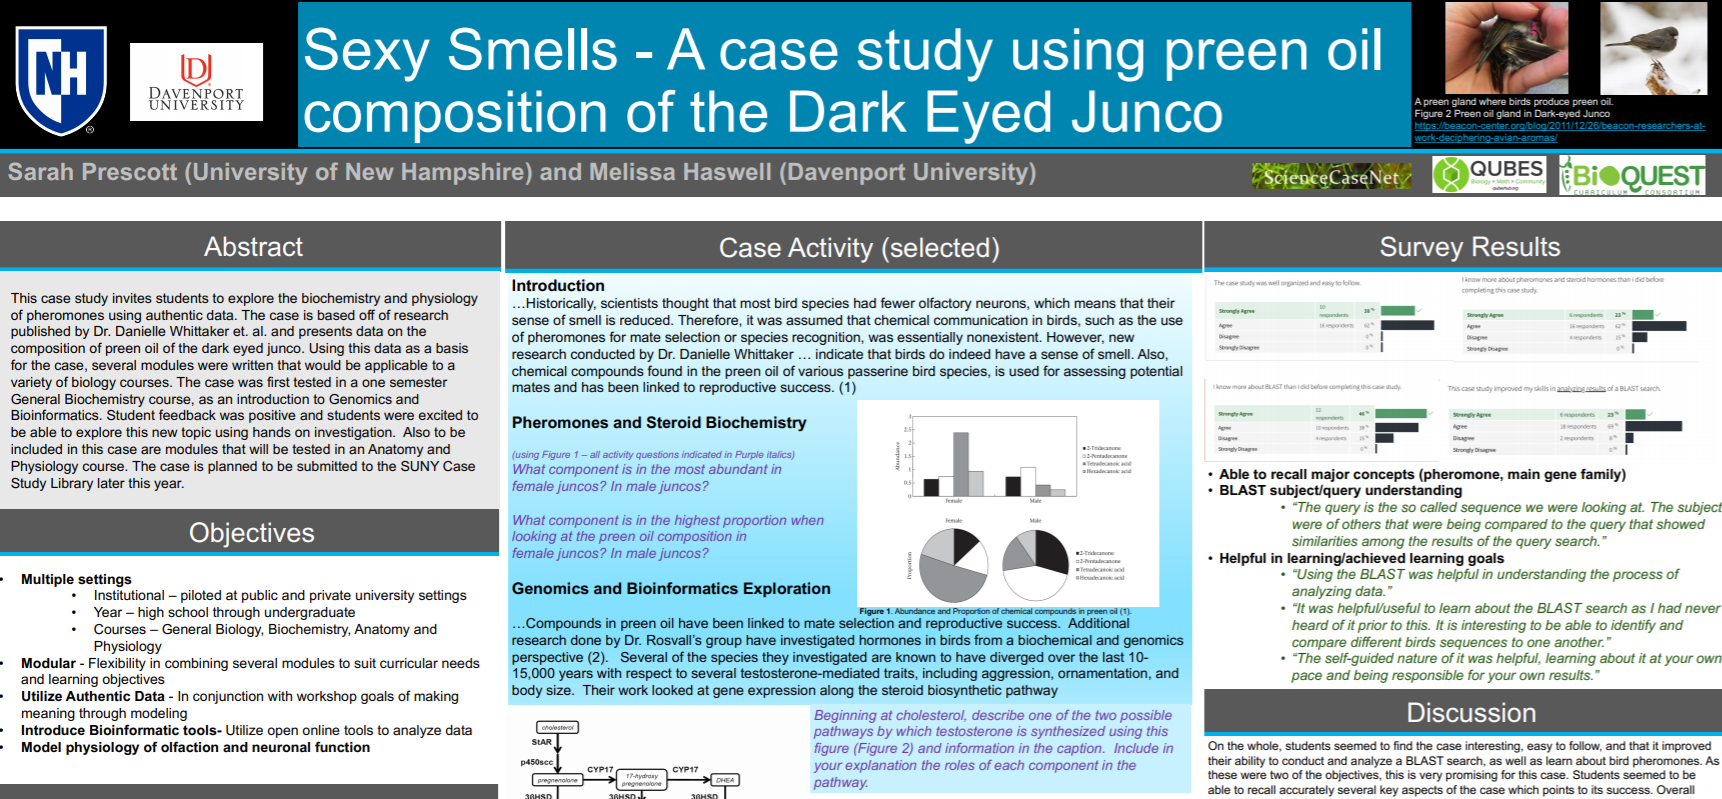 Sexy Smells - A case study using preen oil composition of the Dark Eyed Junco